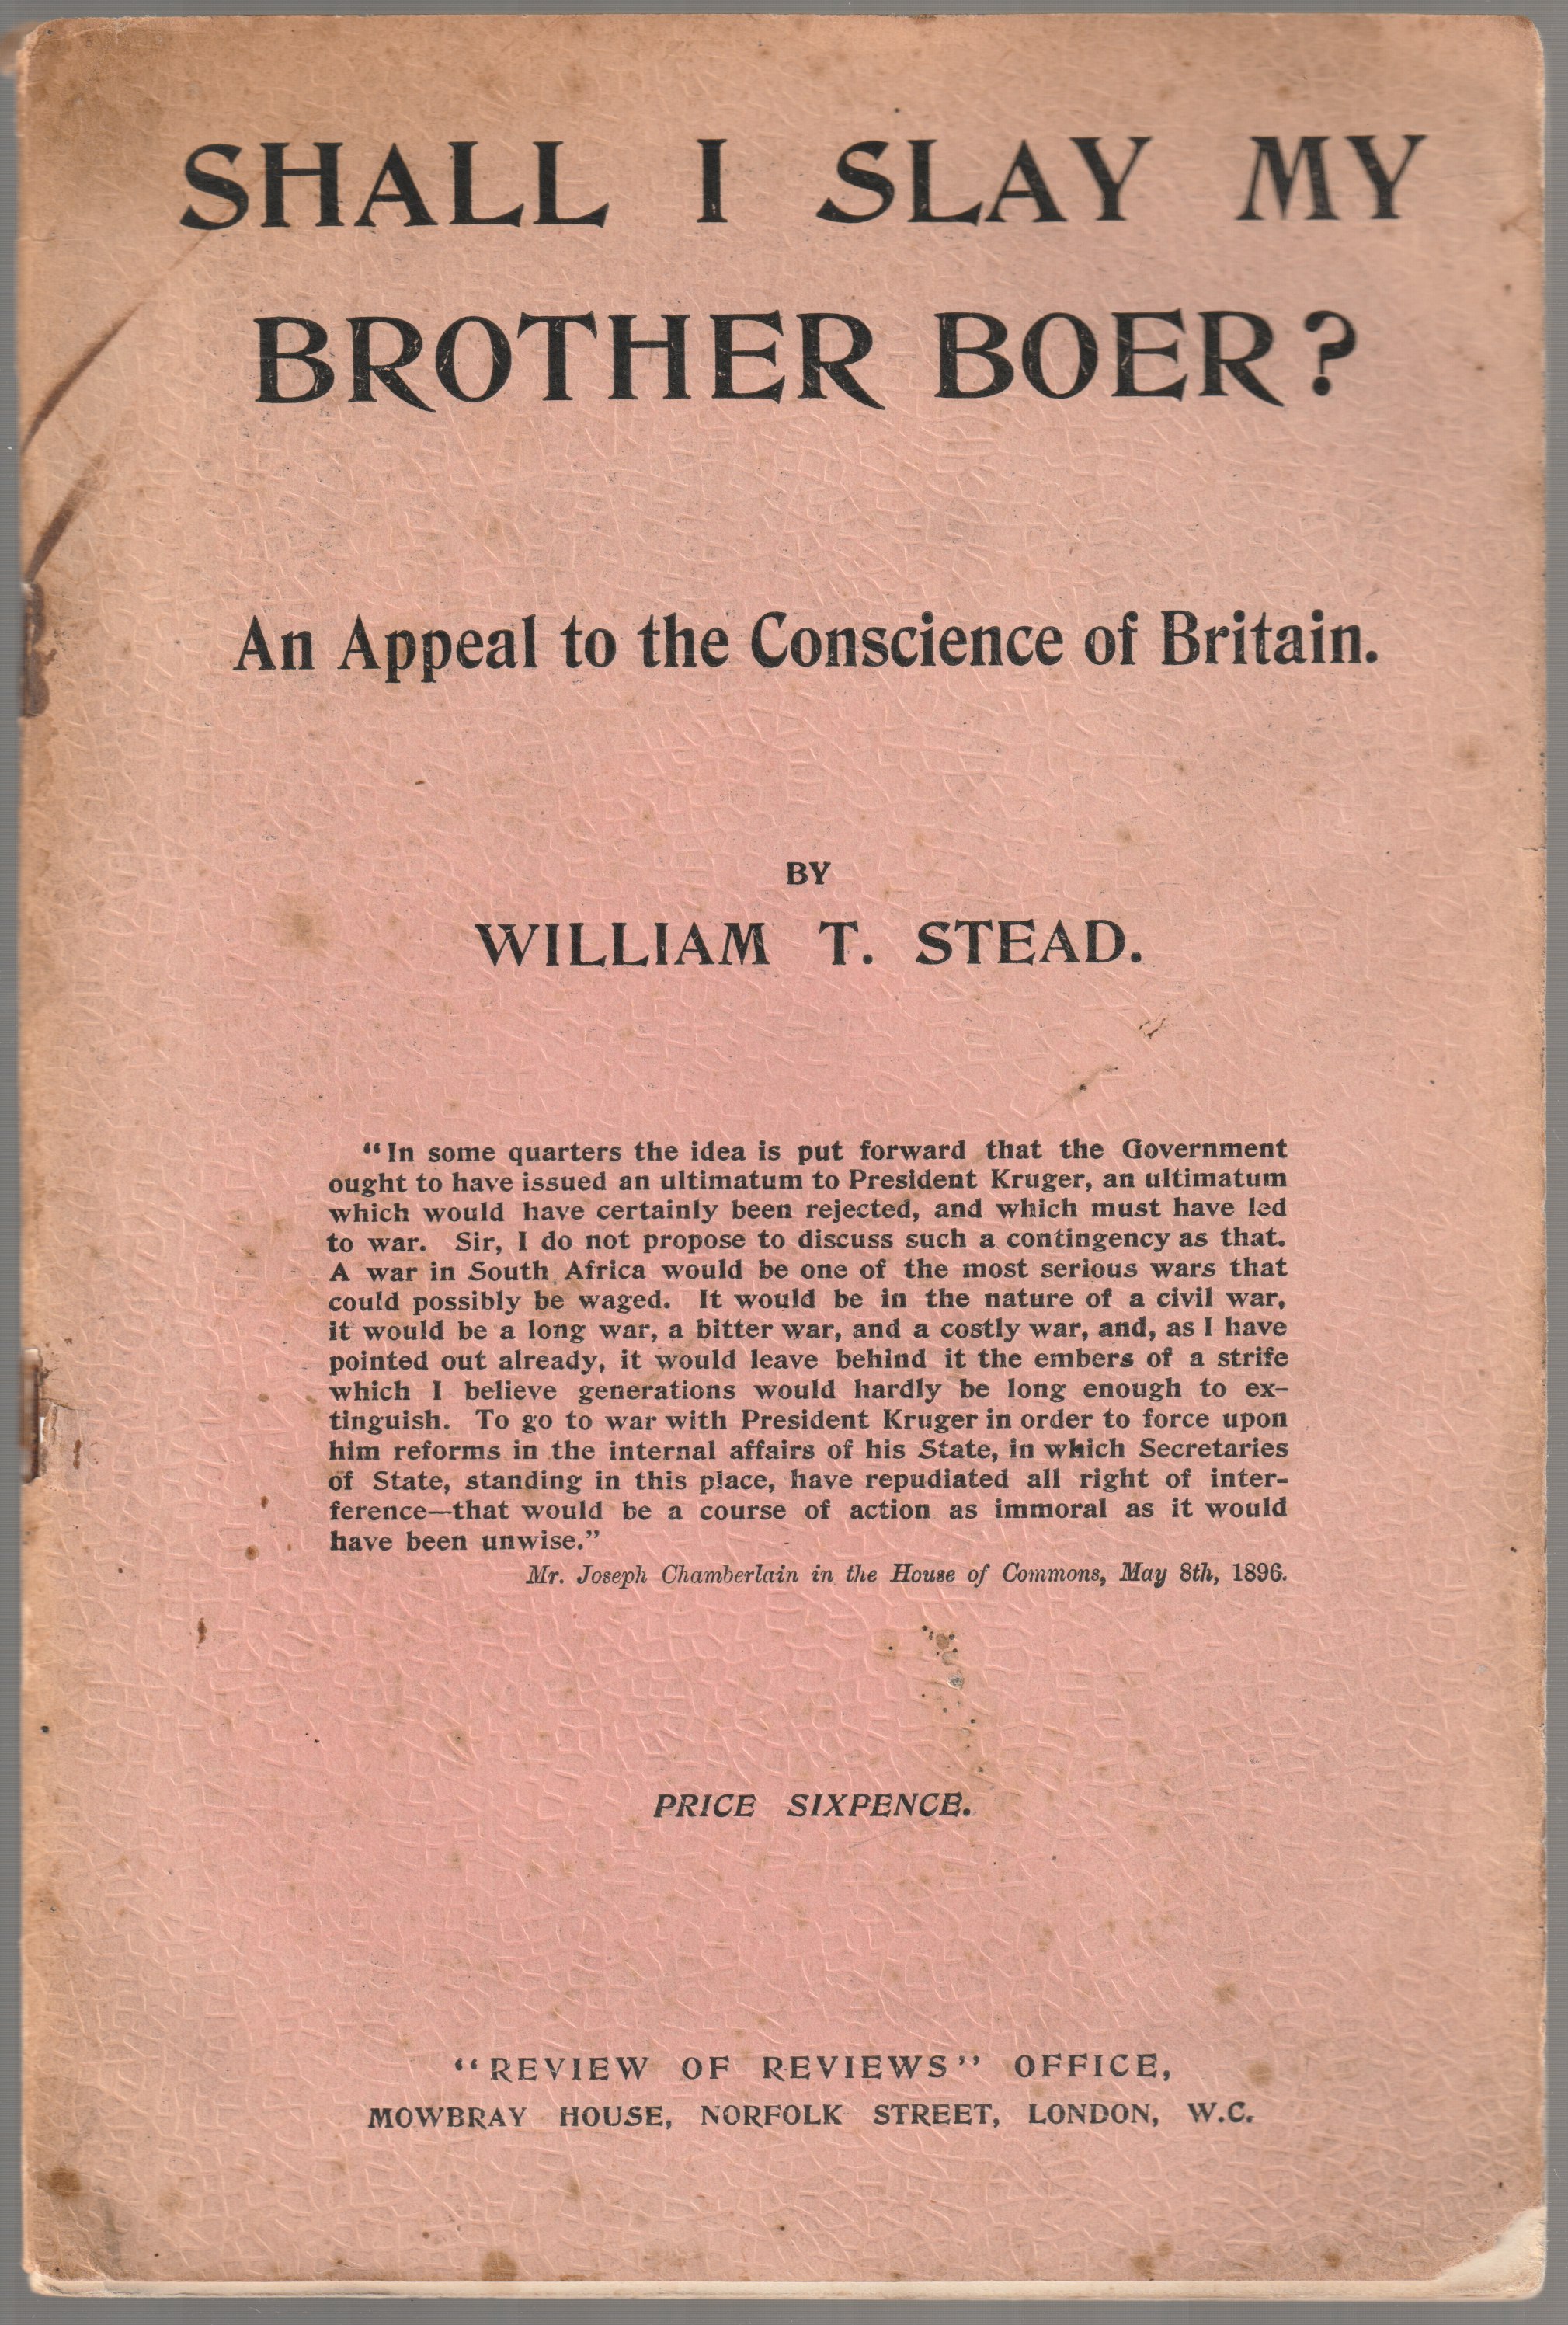 Shall I slay my brother Boer? An appeal to the conscience of Britain.